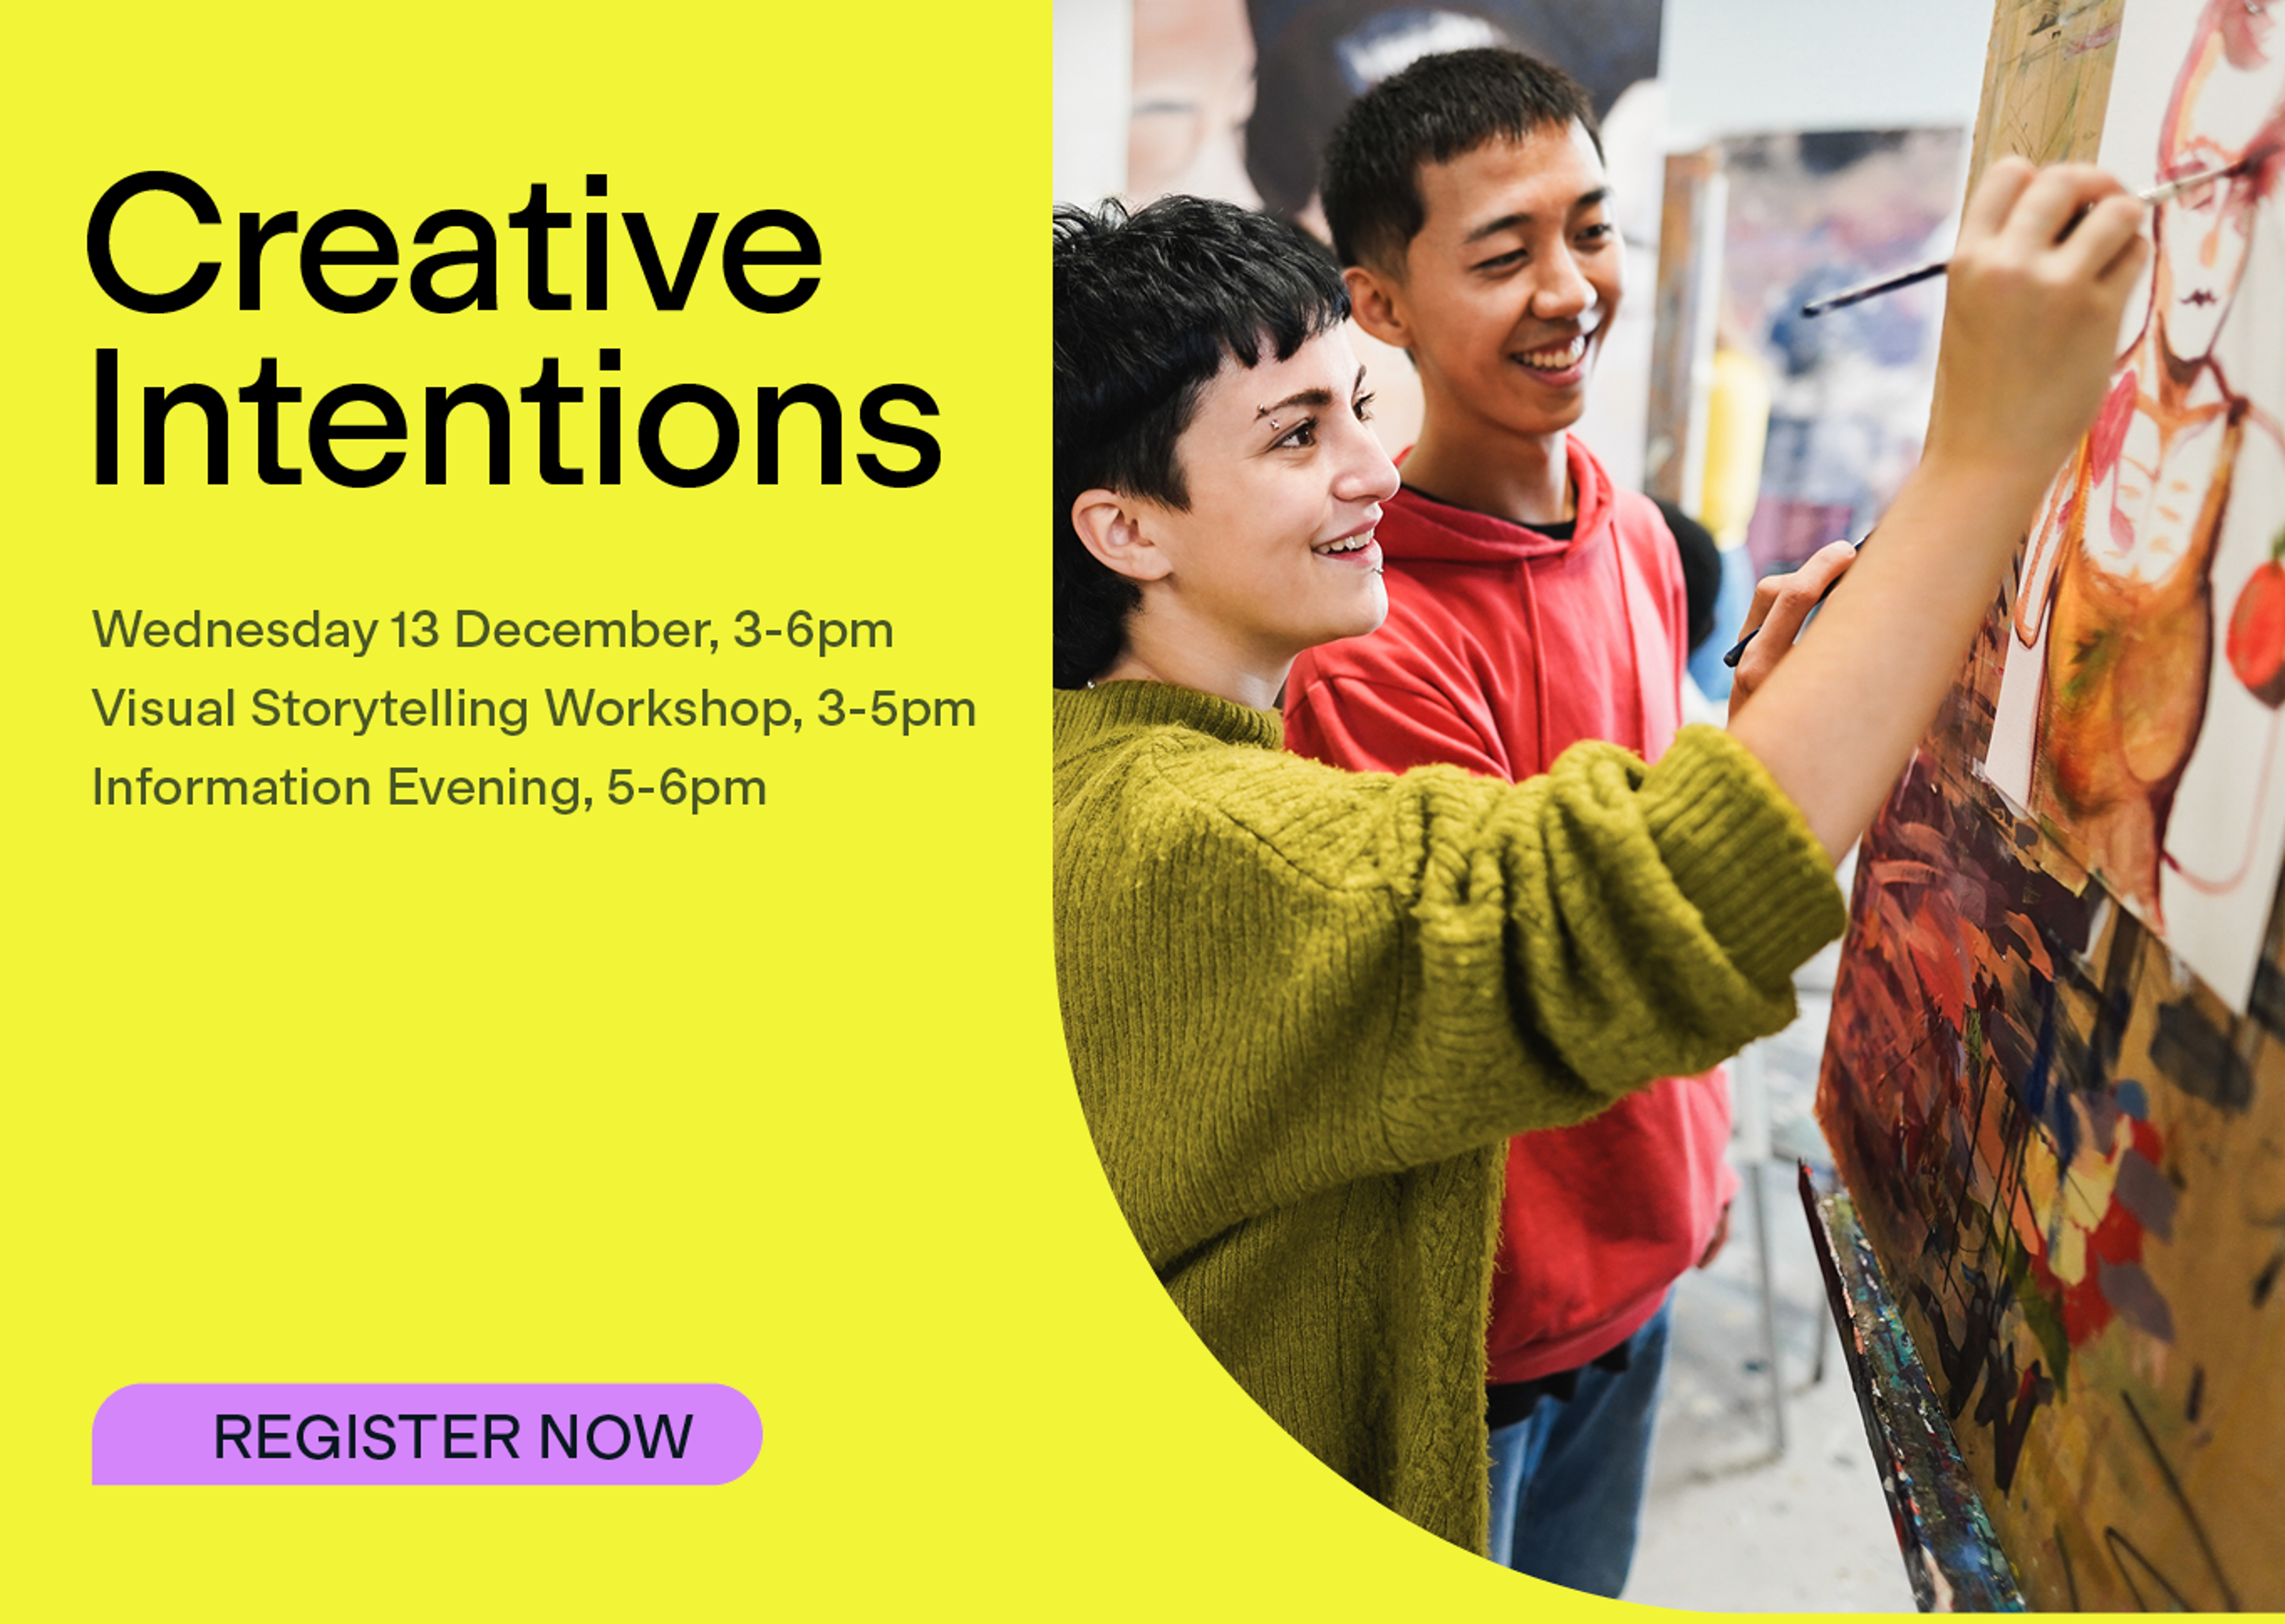 Join the 'Creative Intentions' workshop on 13 December for an evening of visual storytelling and inspiration.